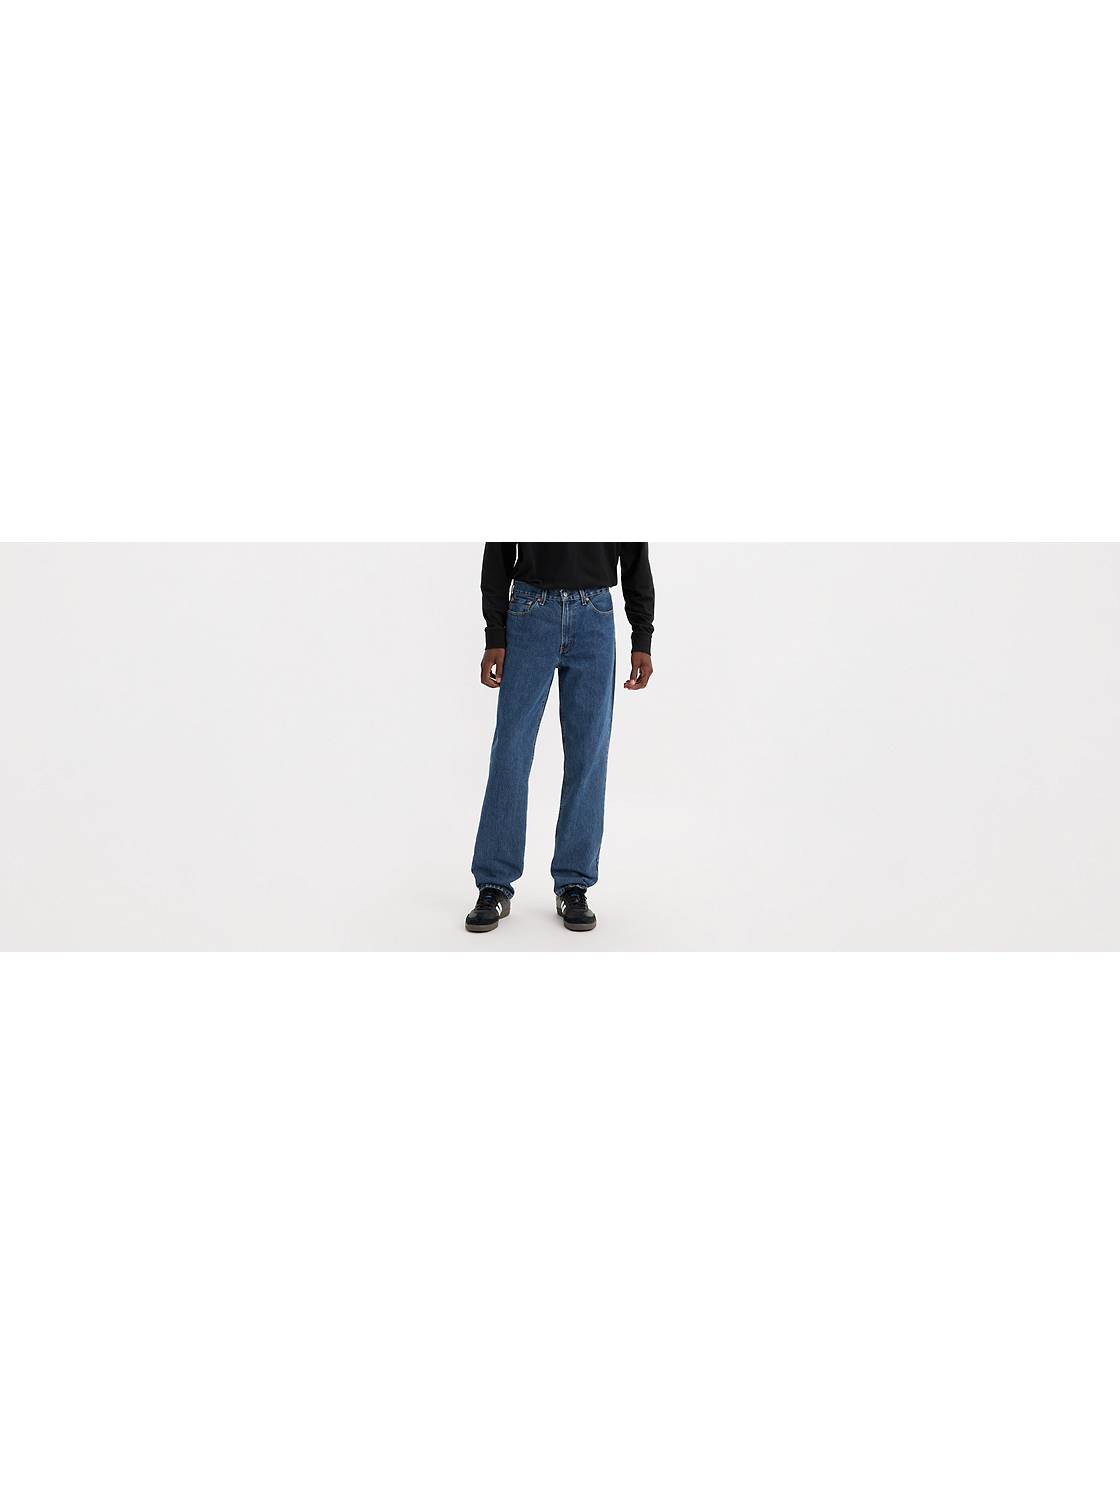 Men's Non-Stretch Relaxed Jeans | US